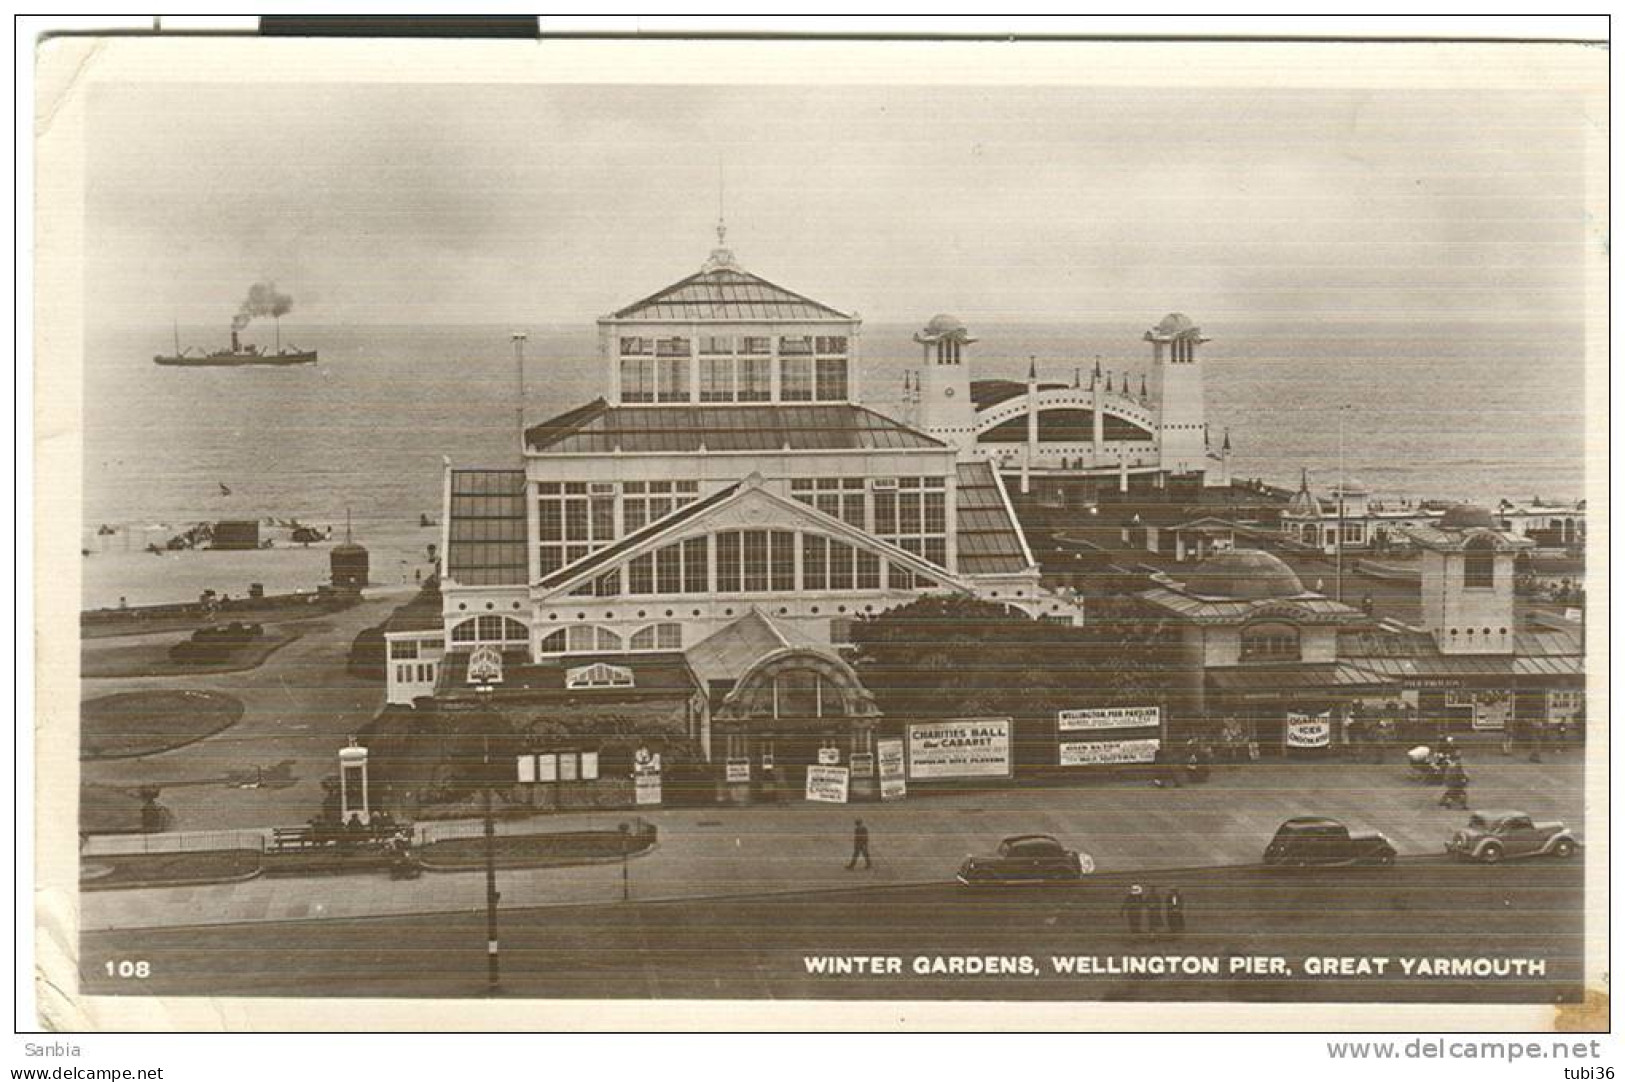 Wellington Pier Gardens, Great Yarmouth - POSTCARD, BLACK WHITE, USED 1947, DESTINATION ITALY, SMALL SIZE 9 X 14, - Great Yarmouth